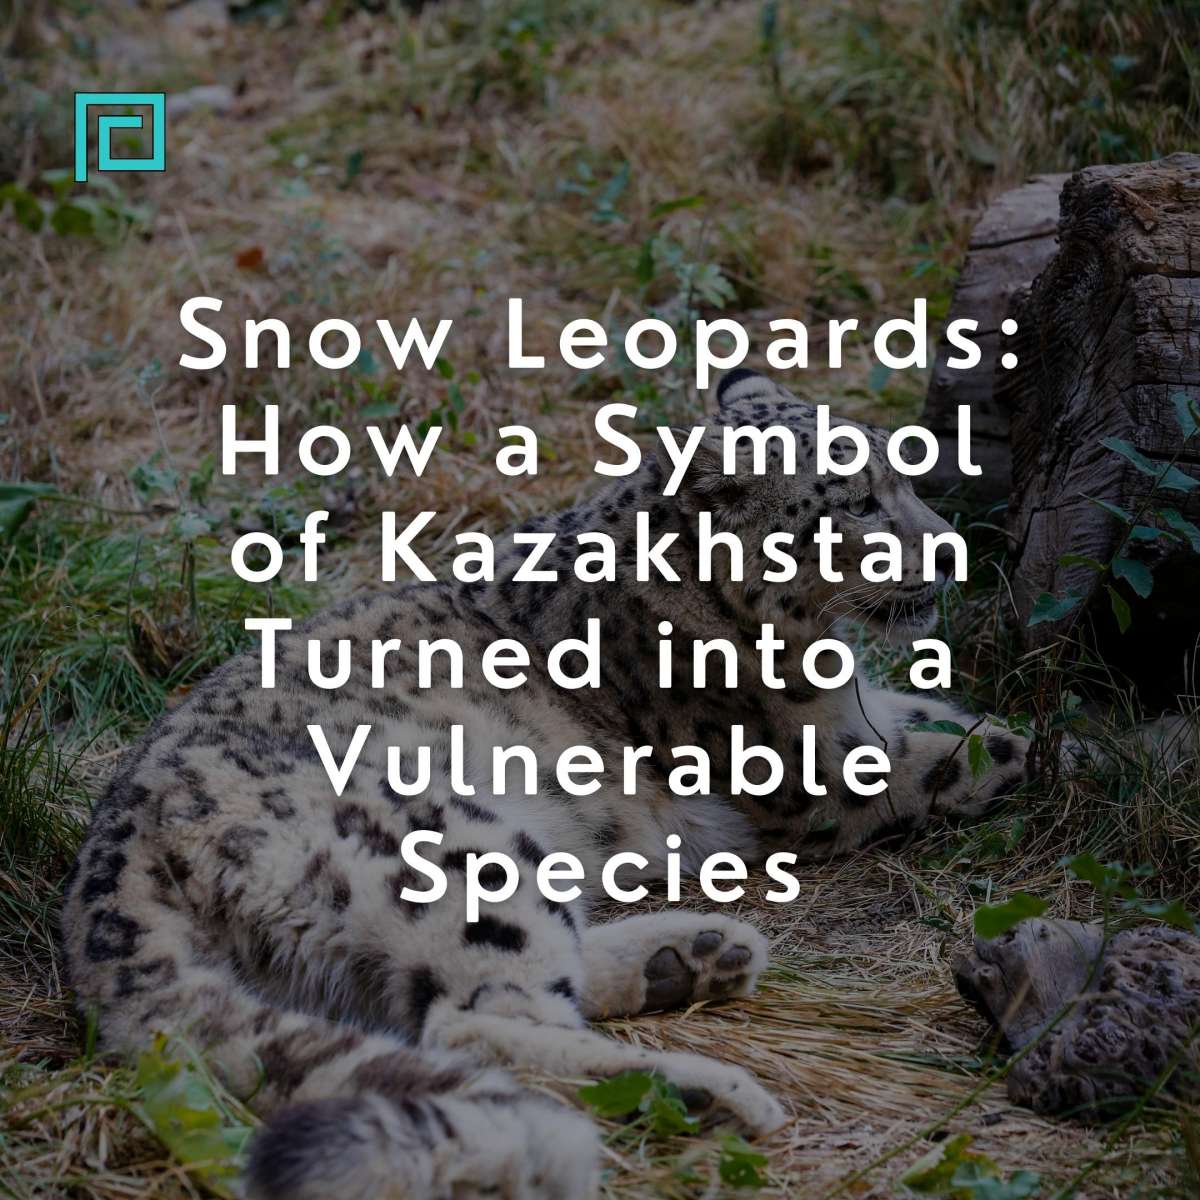 Snow Leopards: How a Symbol of Kazakhstan Turned into a Vulnerable Species